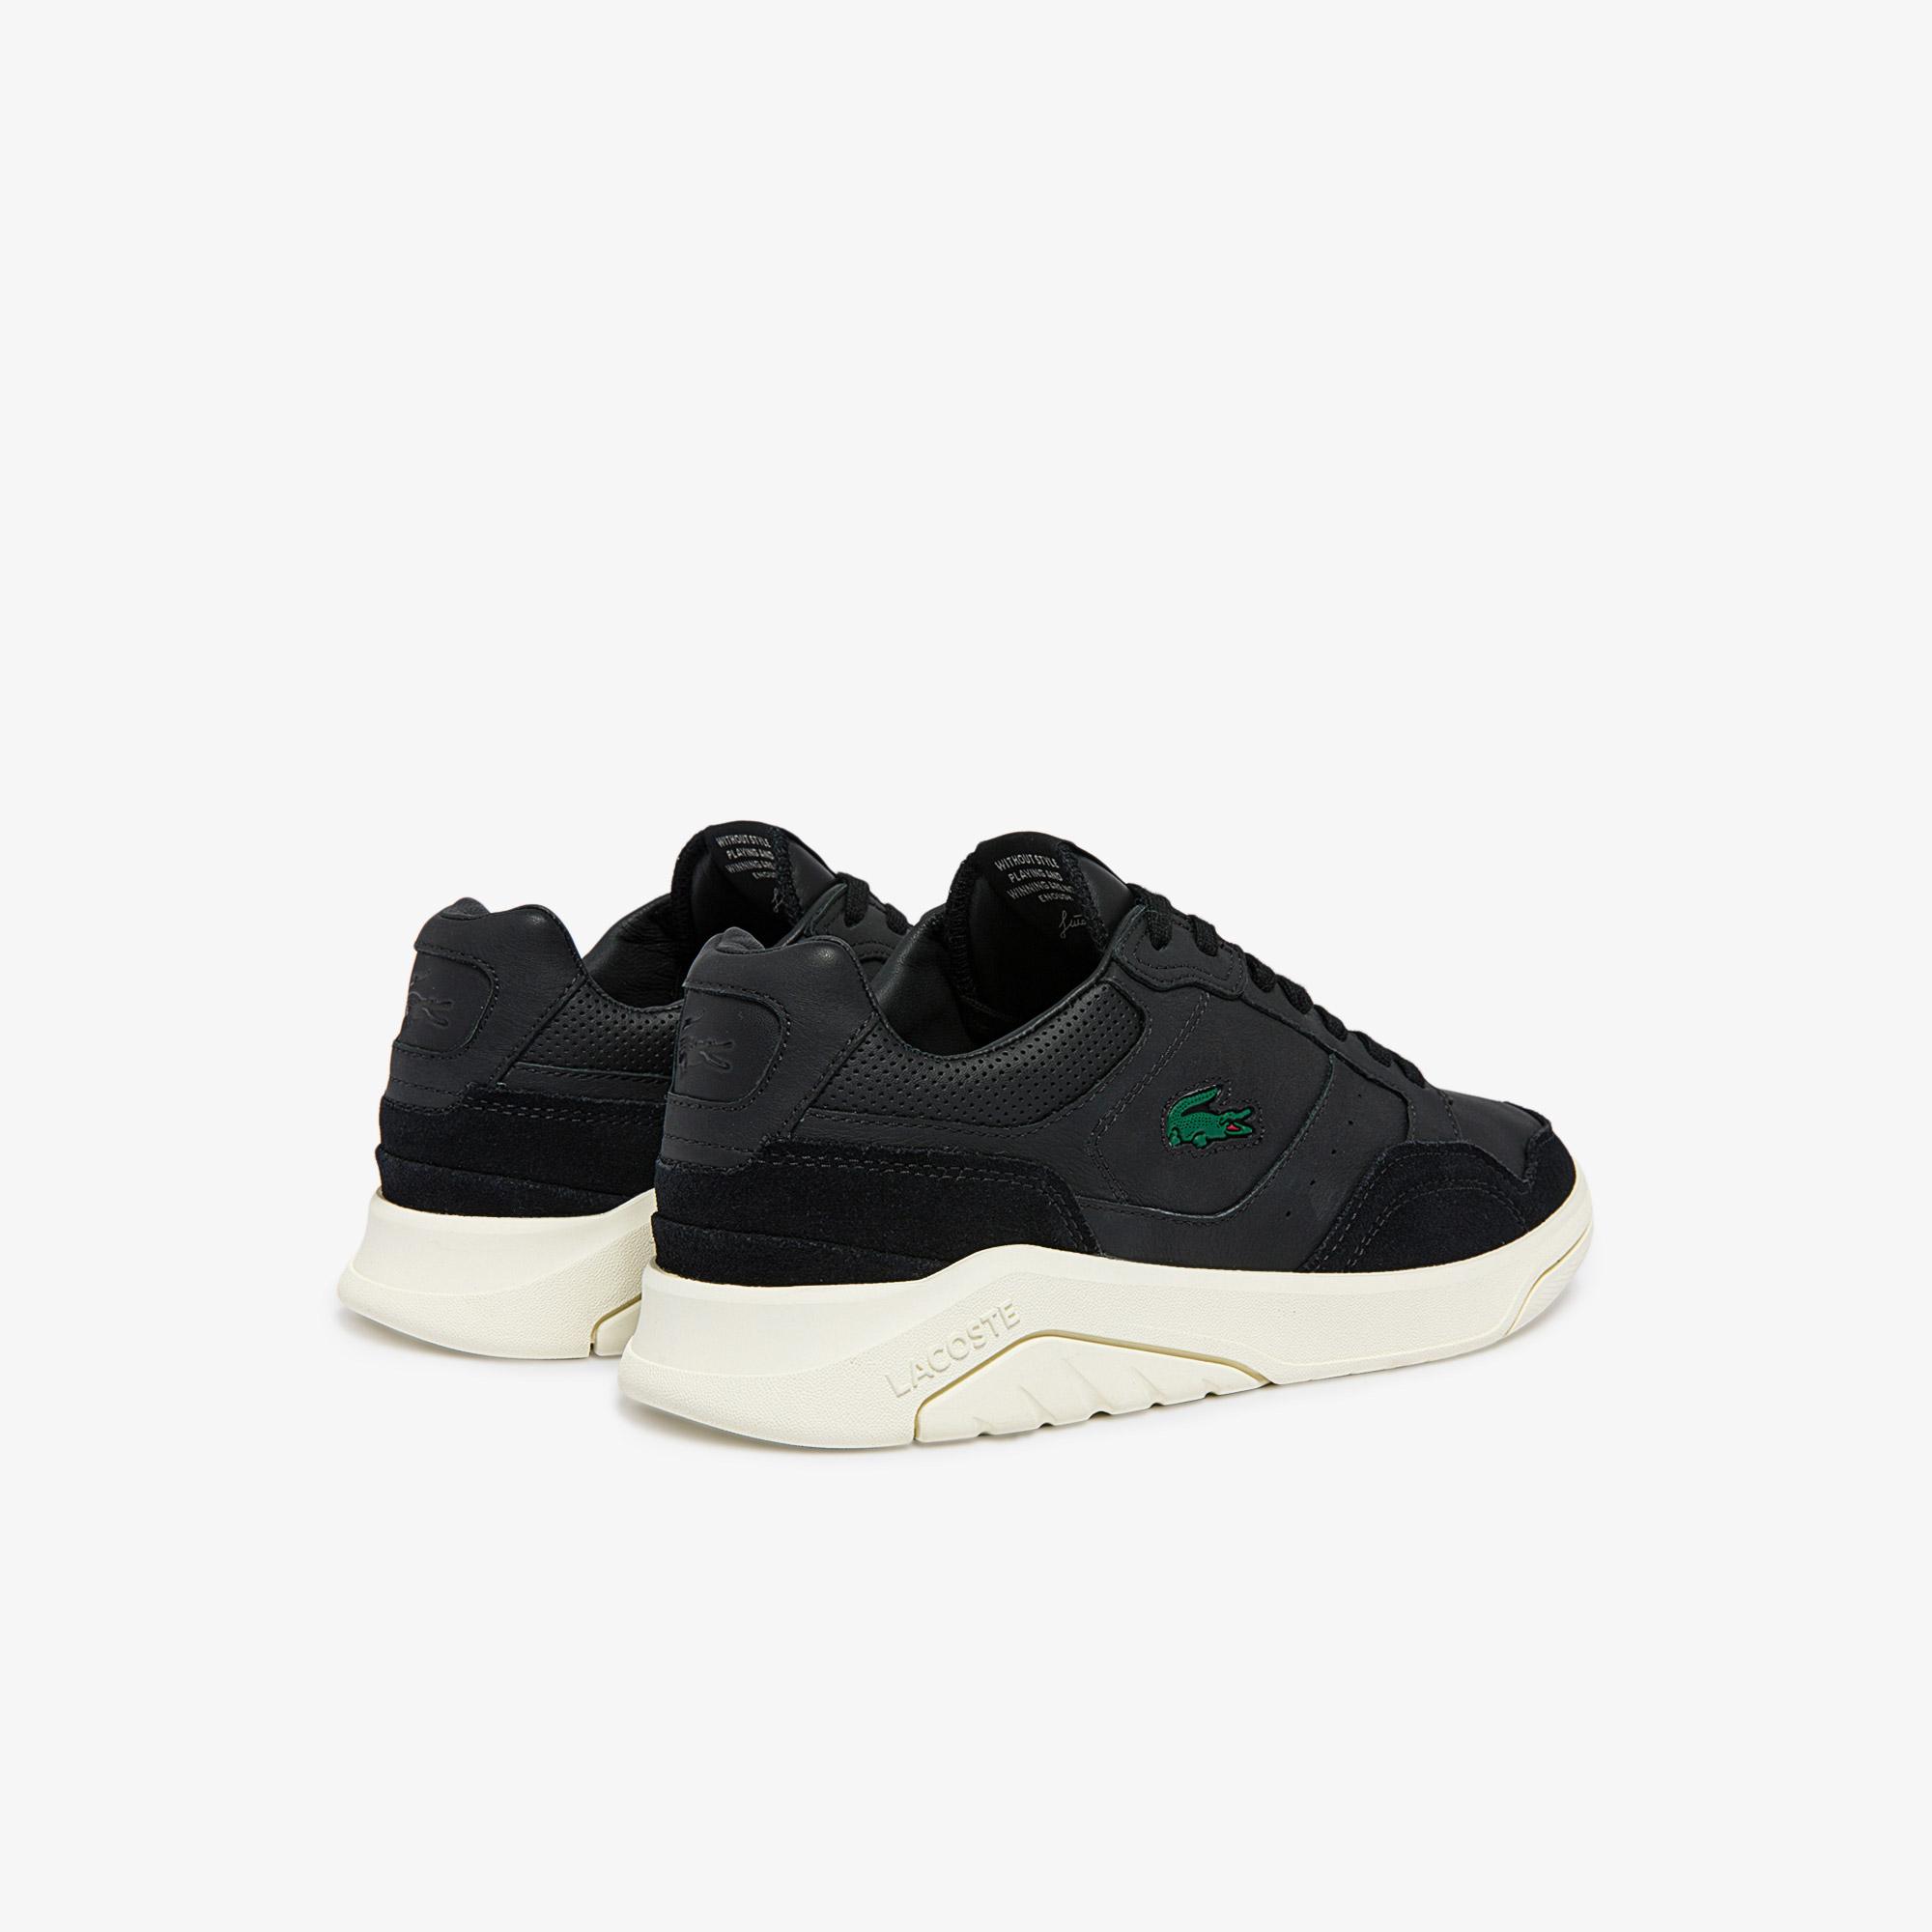 Lacoste Men's Game Advance Sneakers. 4